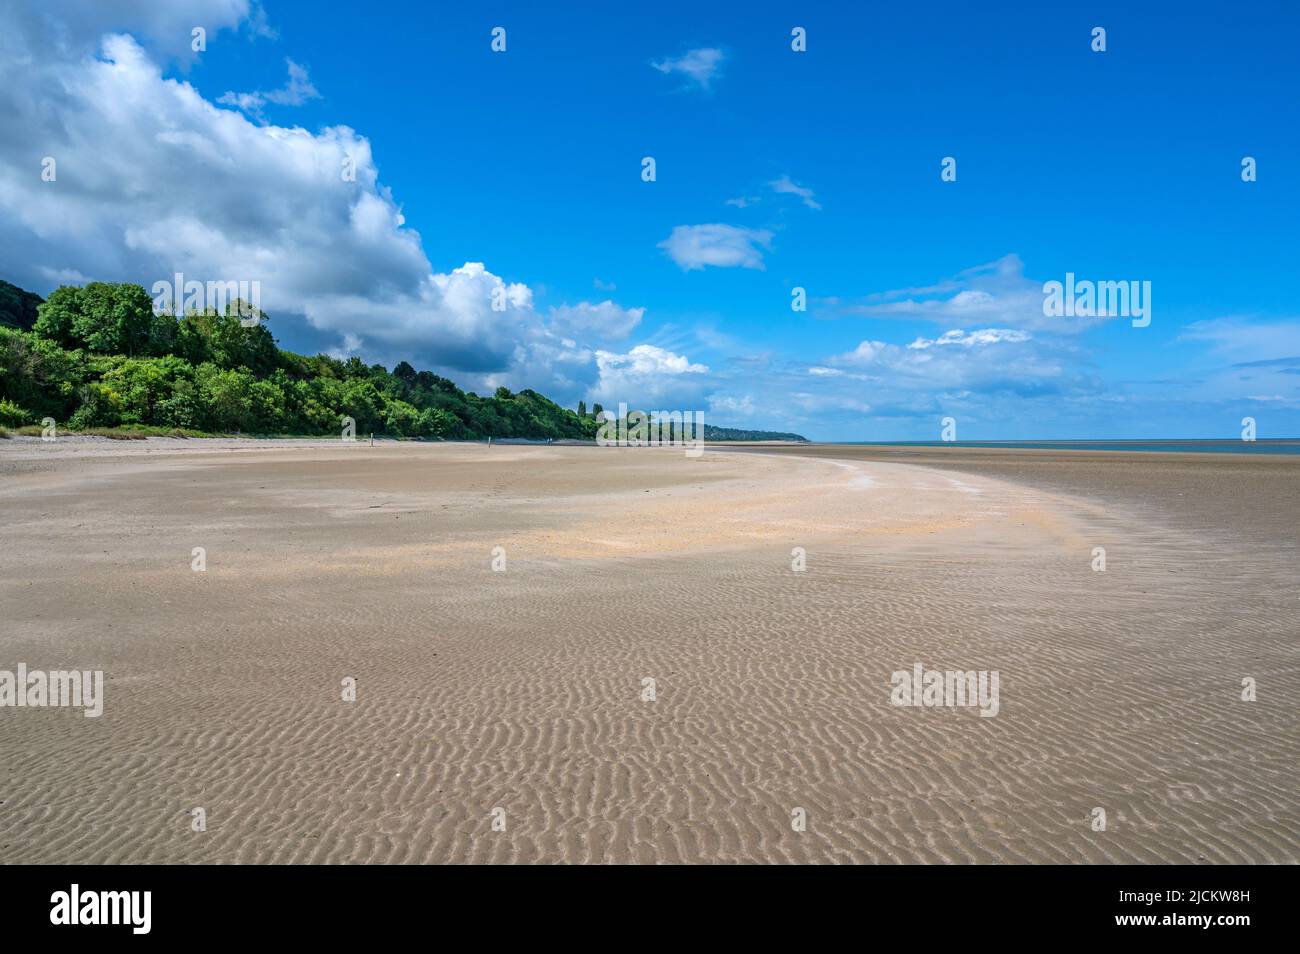 The beach  Plage du Butin at the Seine estuary of Honfleur on the left bank of the Seine river opposite Le Havre, Normandy, France Stock Photo